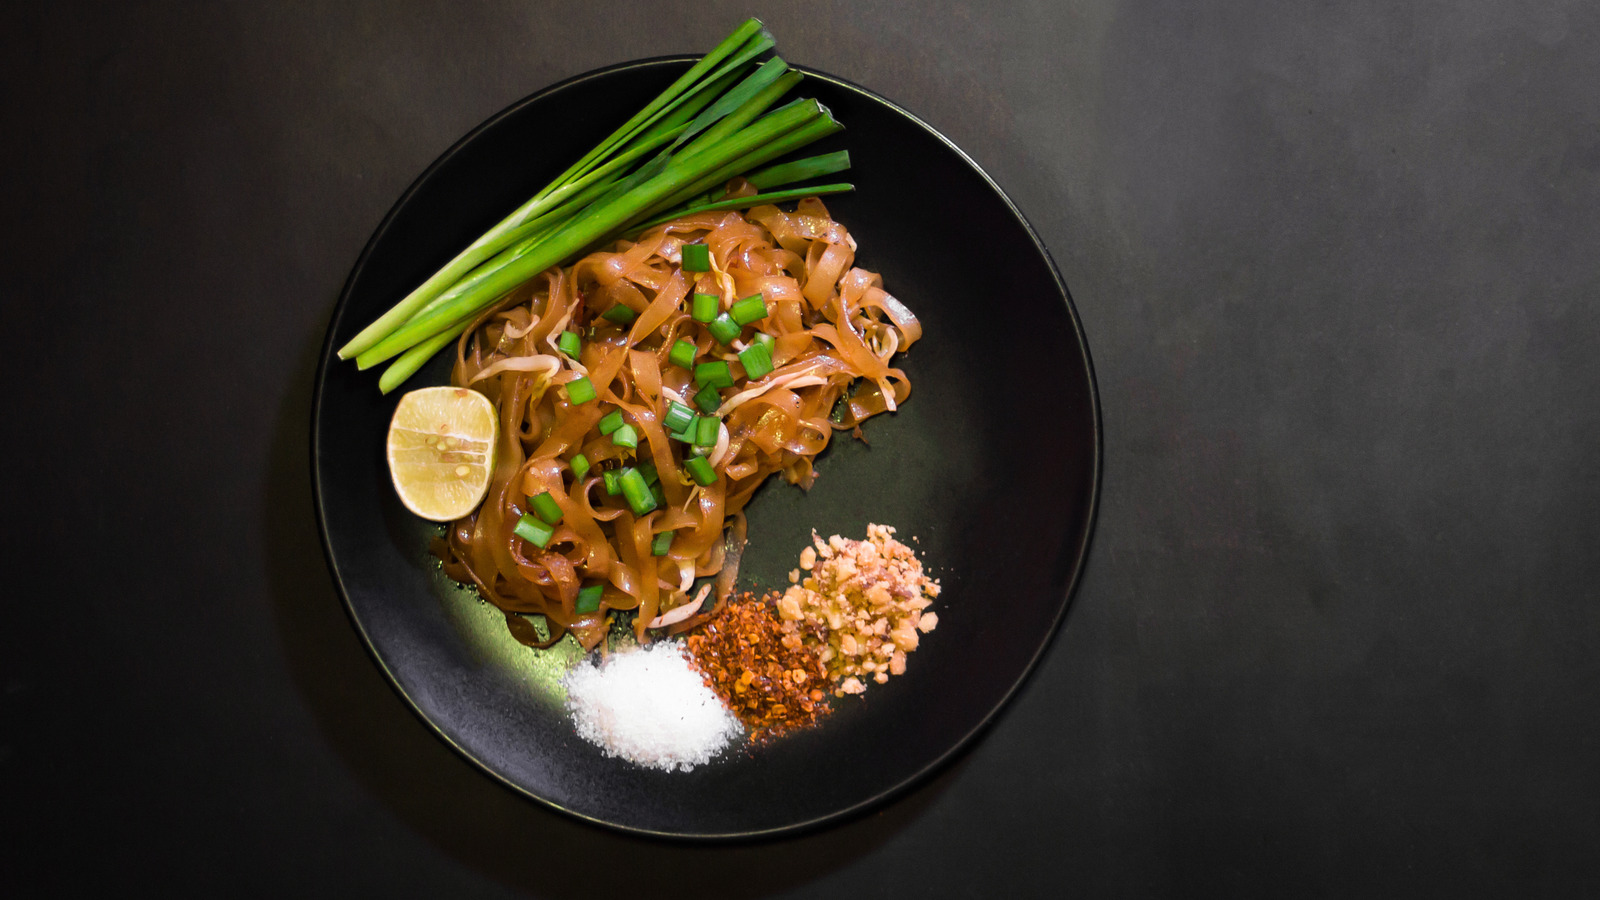 https://www.thedailymeal.com/img/gallery/how-to-reheat-leftover-pad-thai-to-perfection-in-a-microwave/l-intro-1683573258.jpg